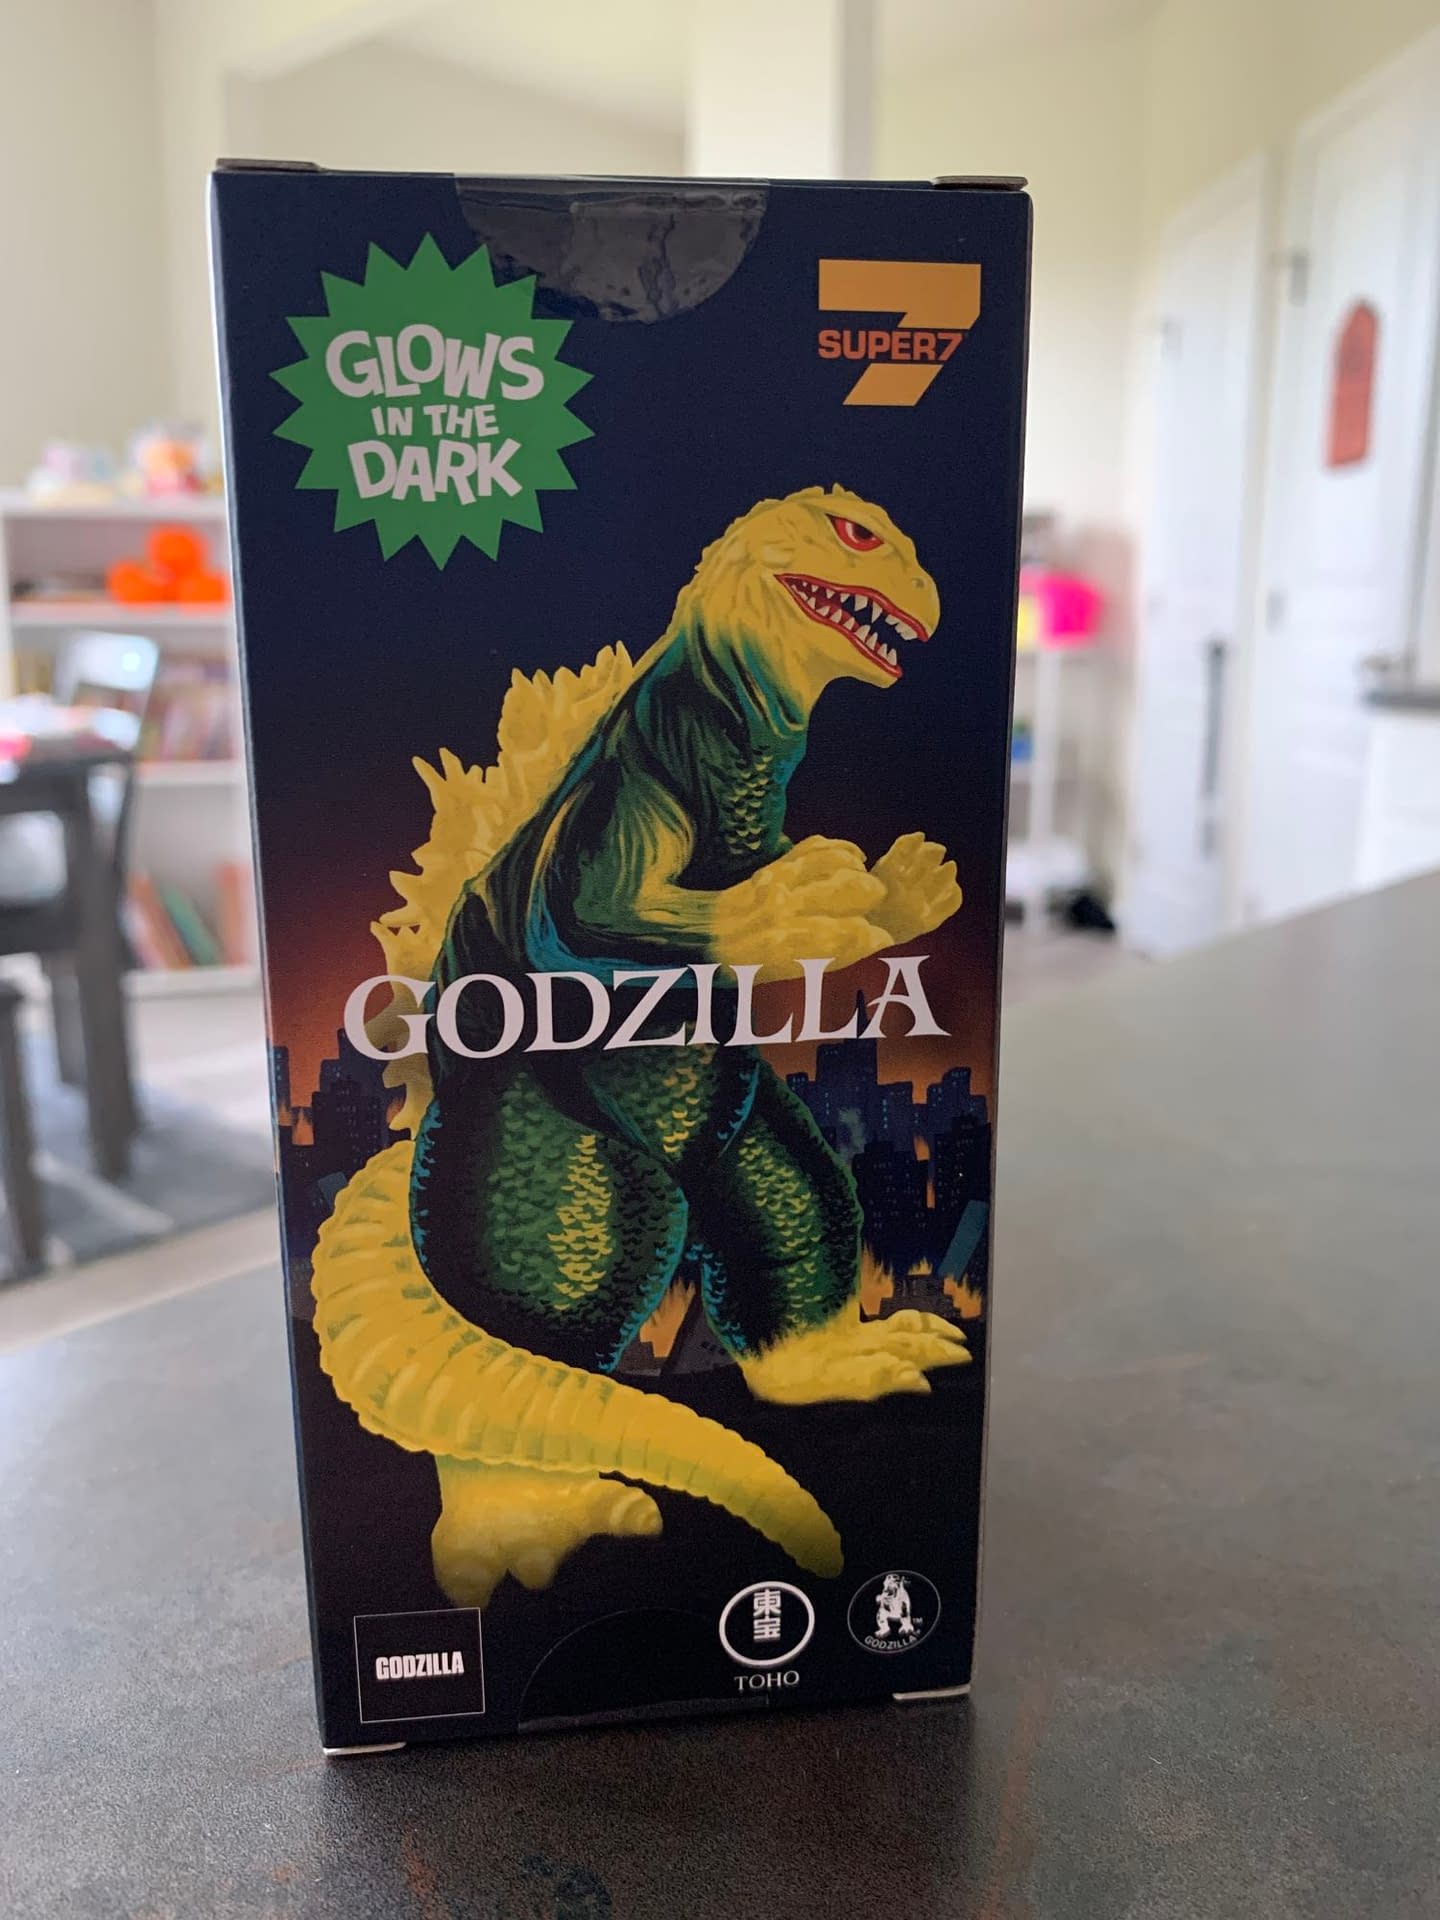 Godzilla Glows With New Super7 Exclusive Figure, On Sale Today